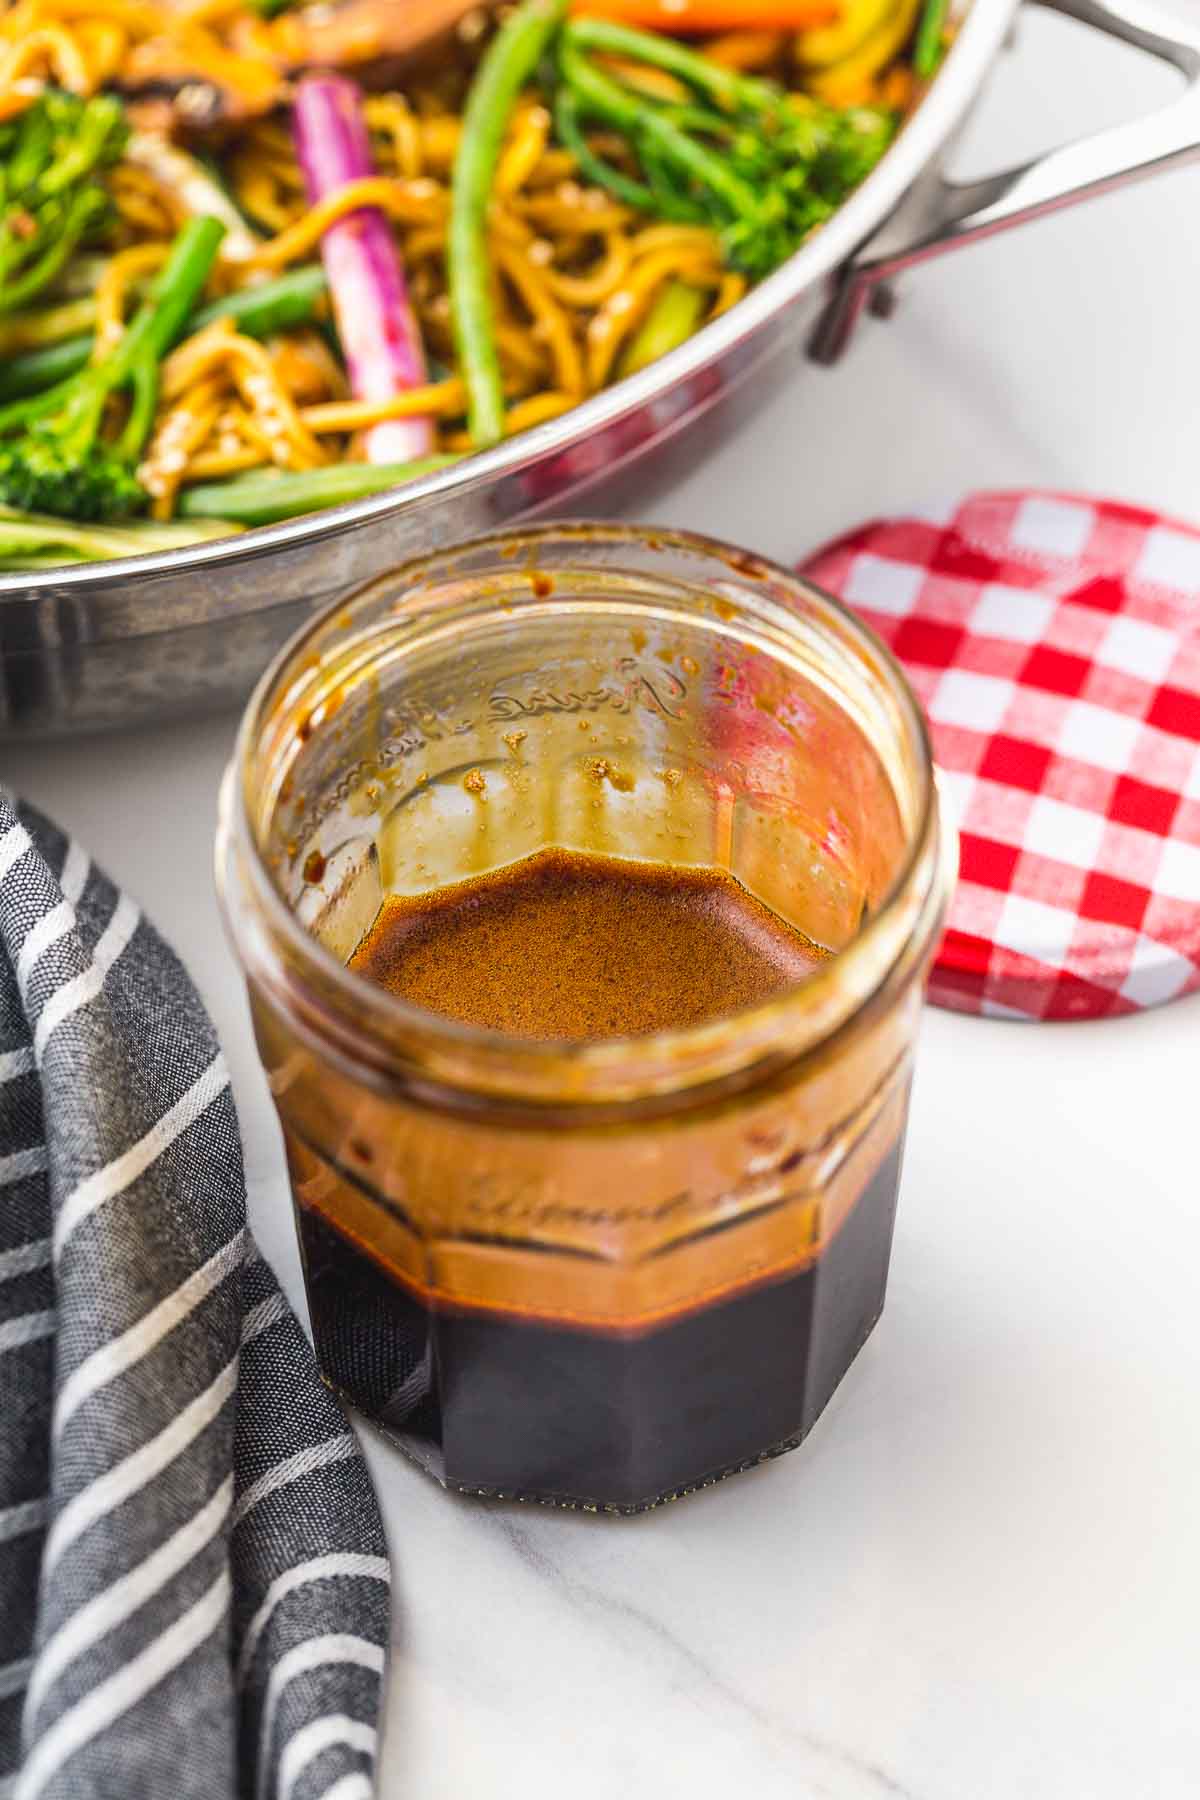 A glass jar with stir fry sauce, and a vegetable stir fry in the background.